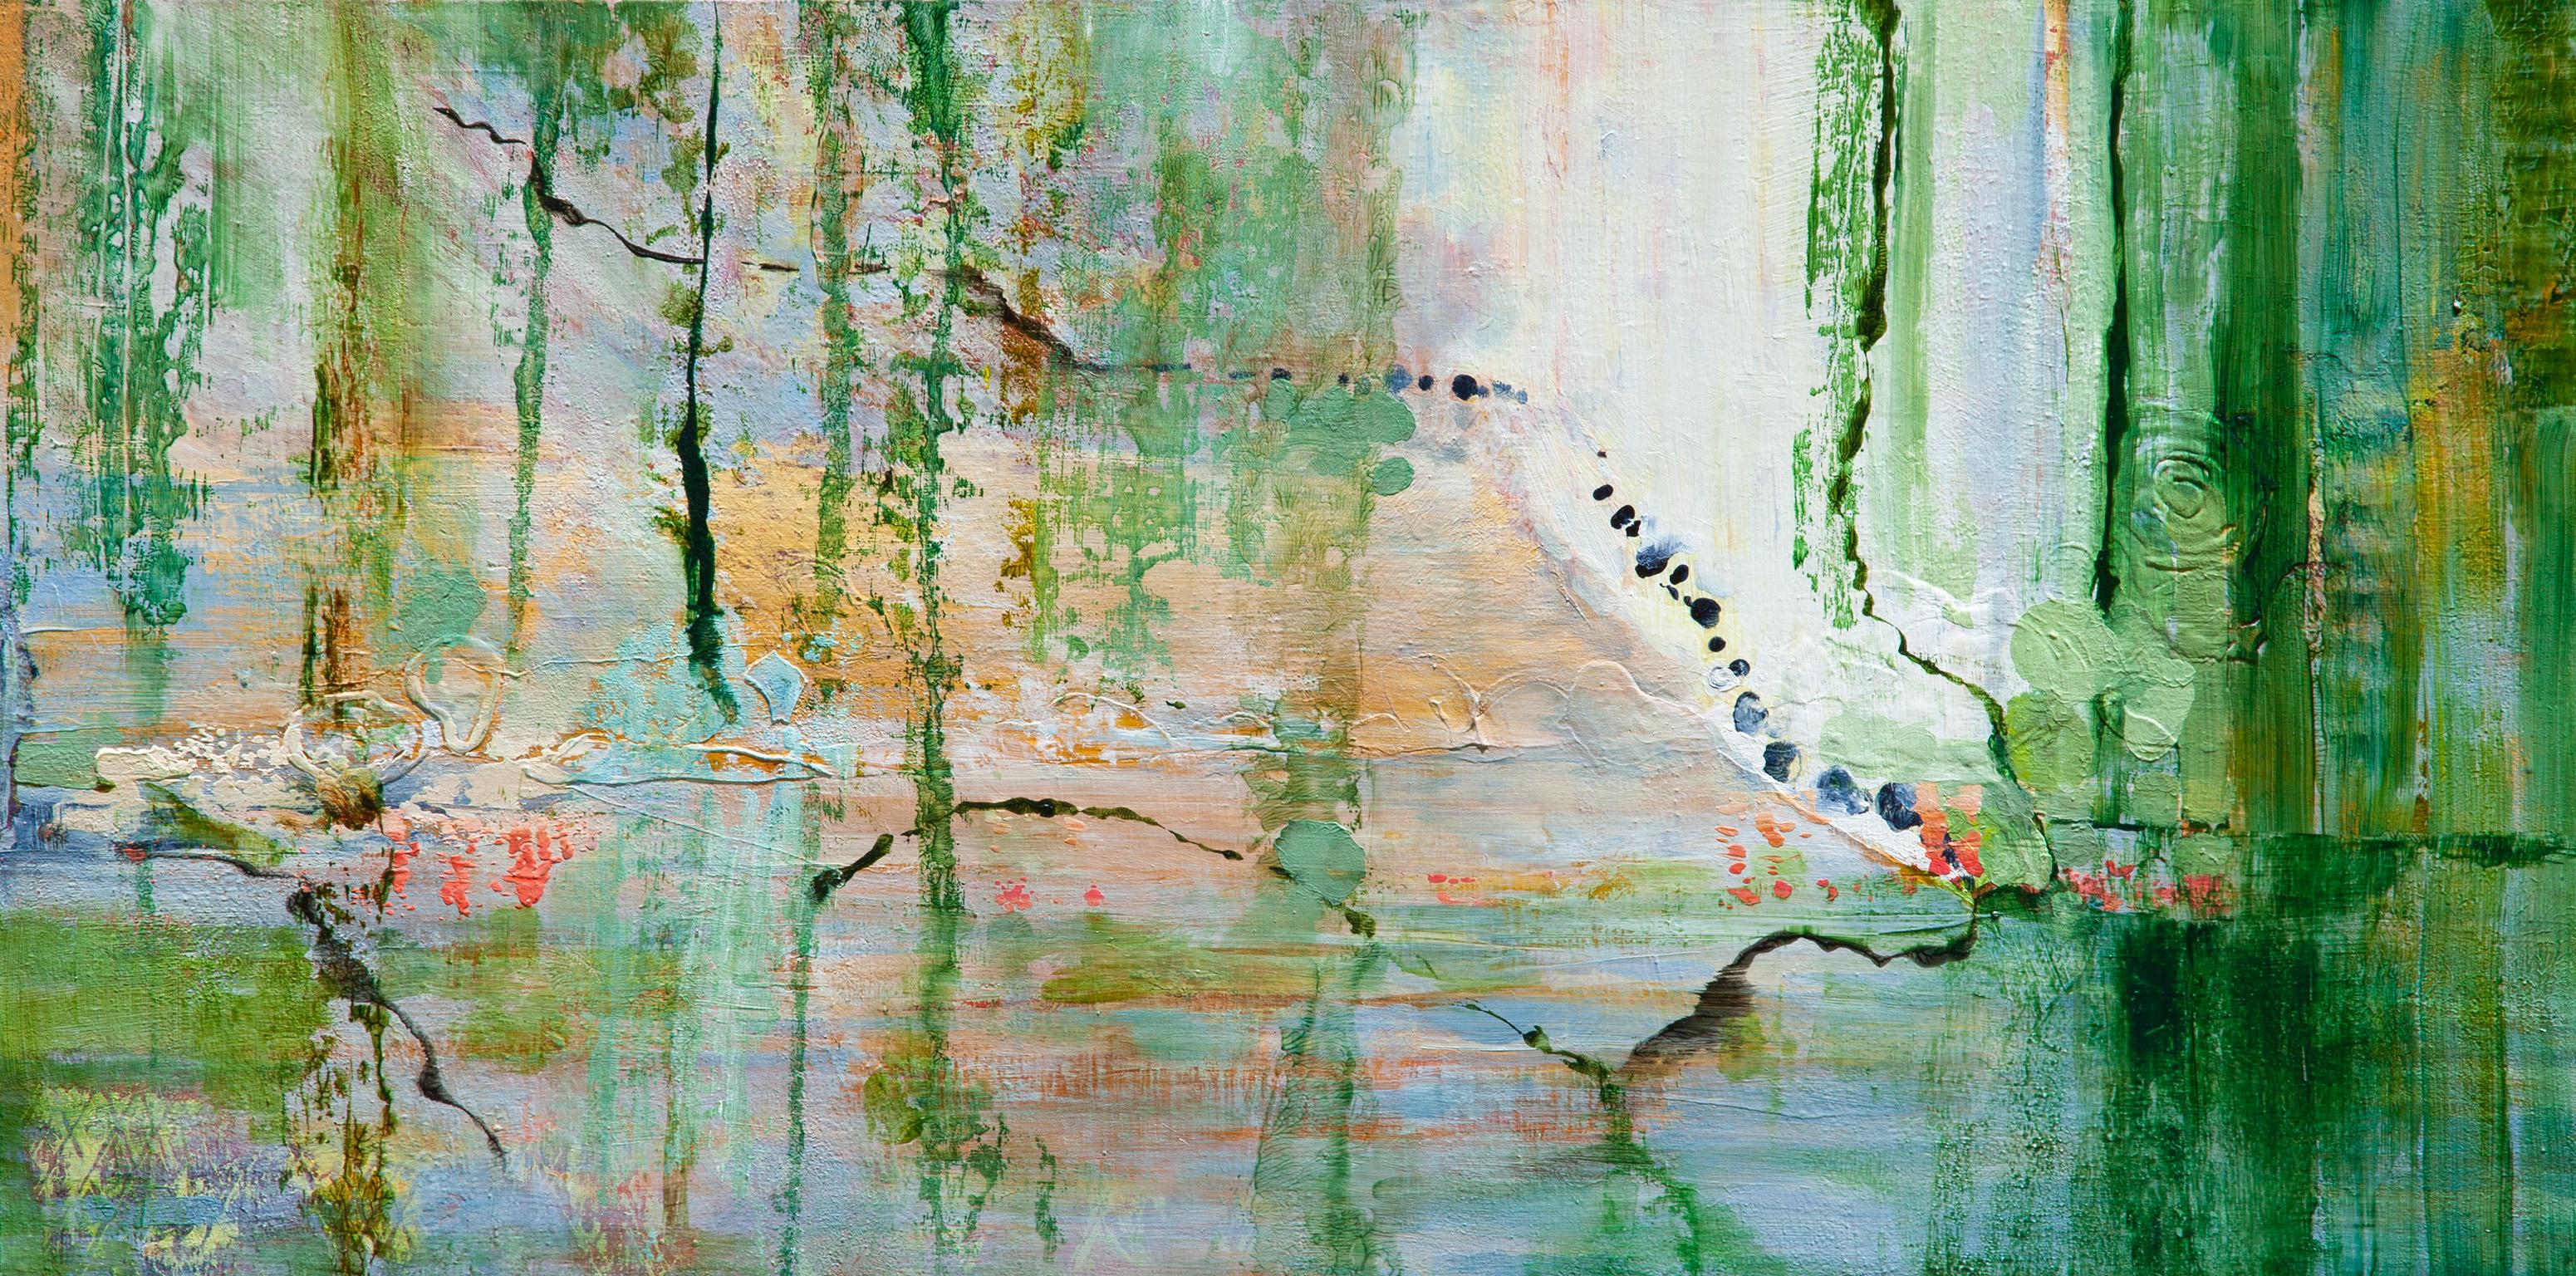 Time Transfixed - Horizontal Abstract Green Landscape Painting on Canvas